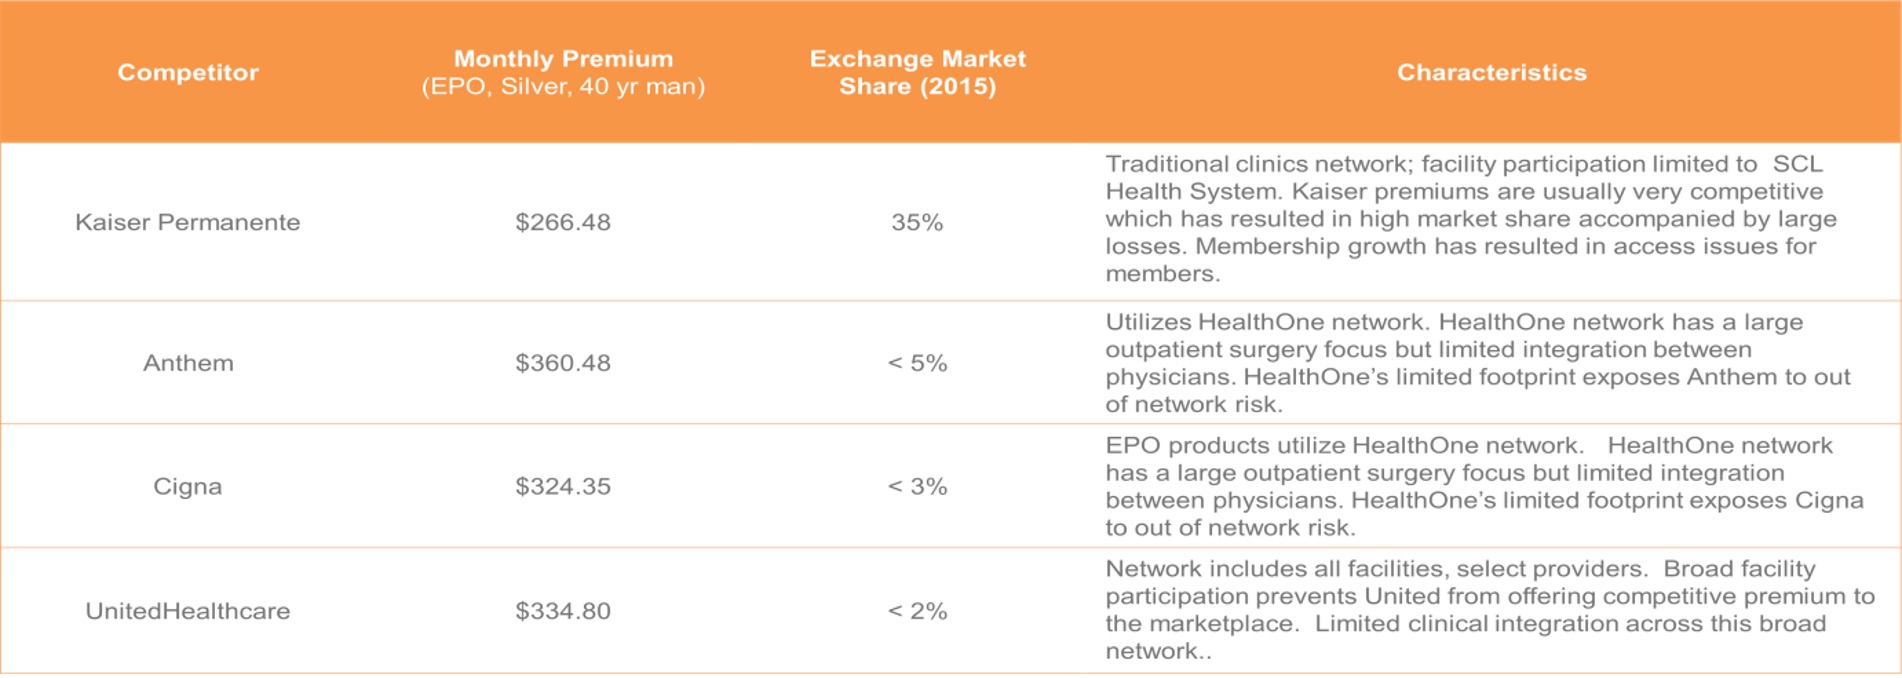 Table of competitors, premiums, exchange markets and characteristics